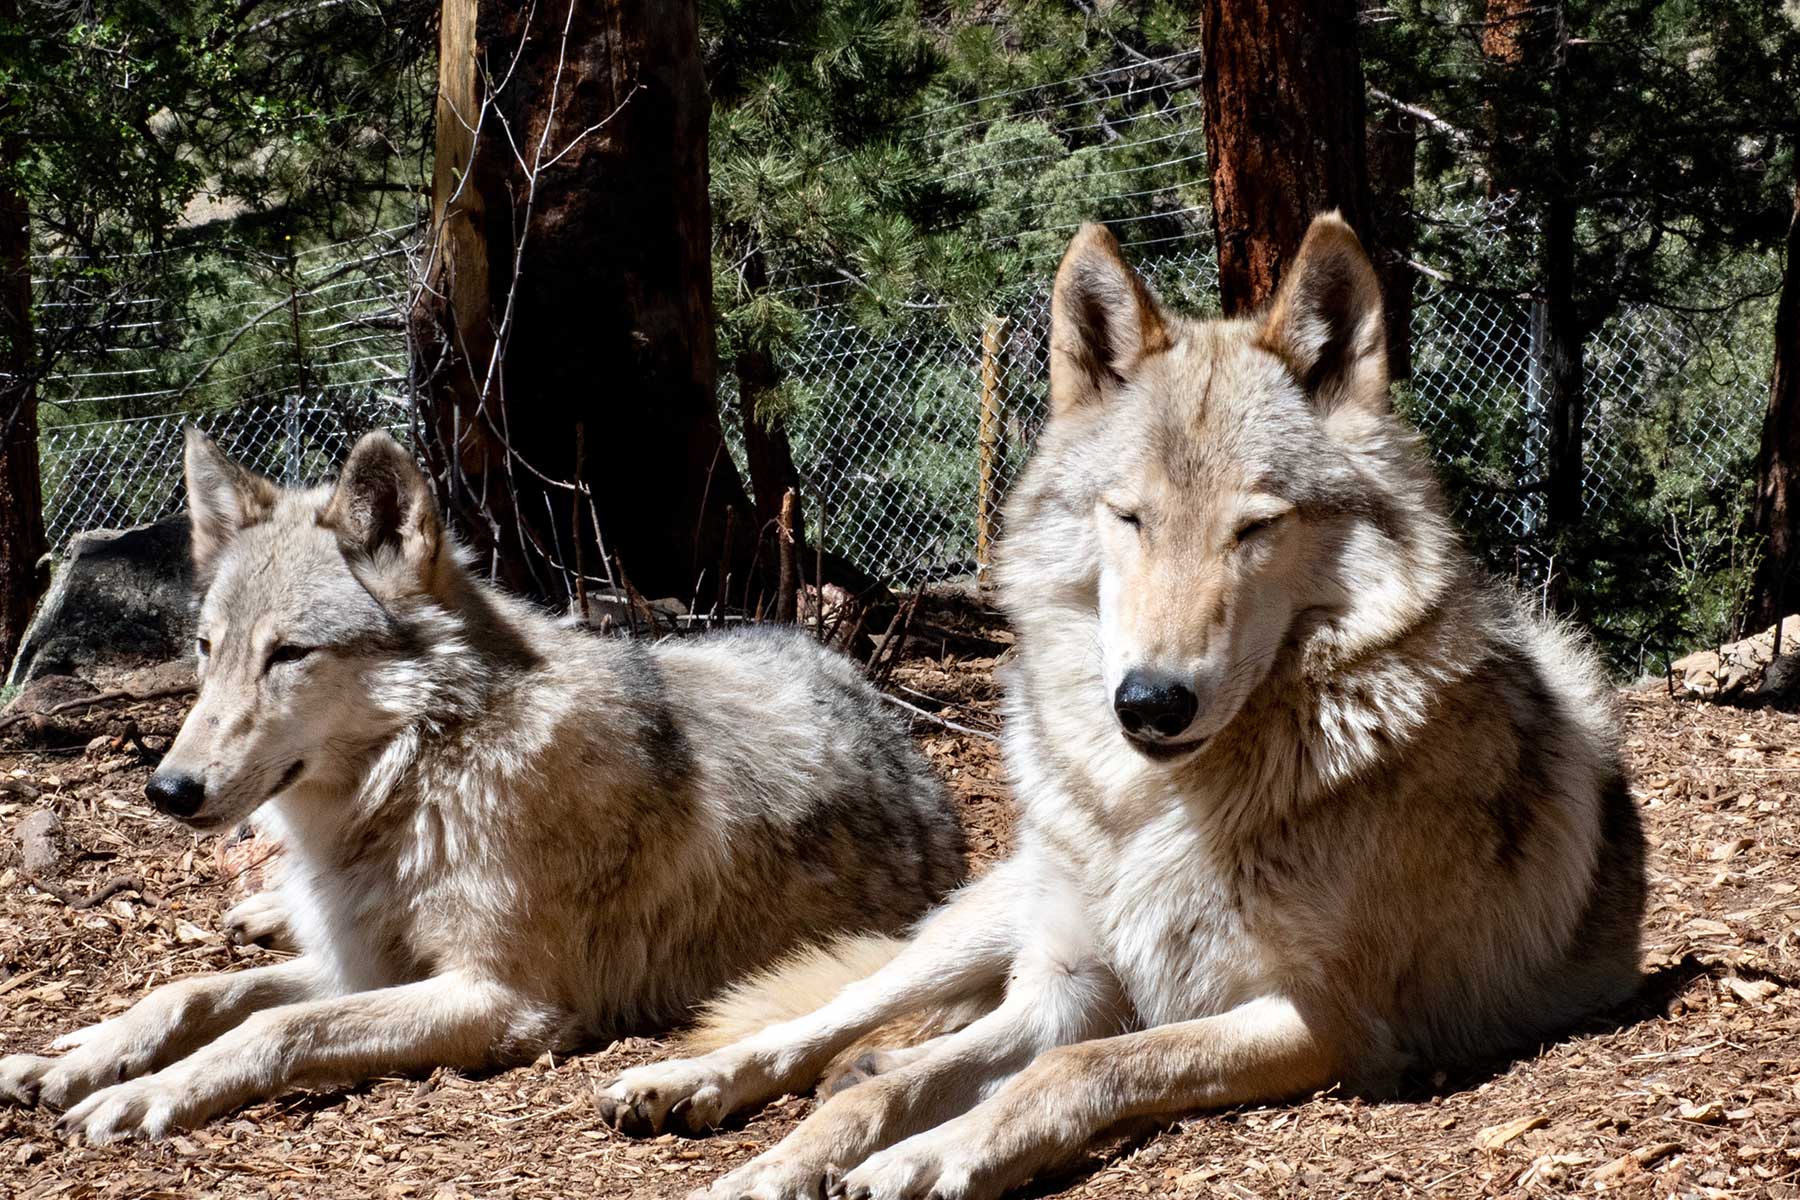 An image of two wolves